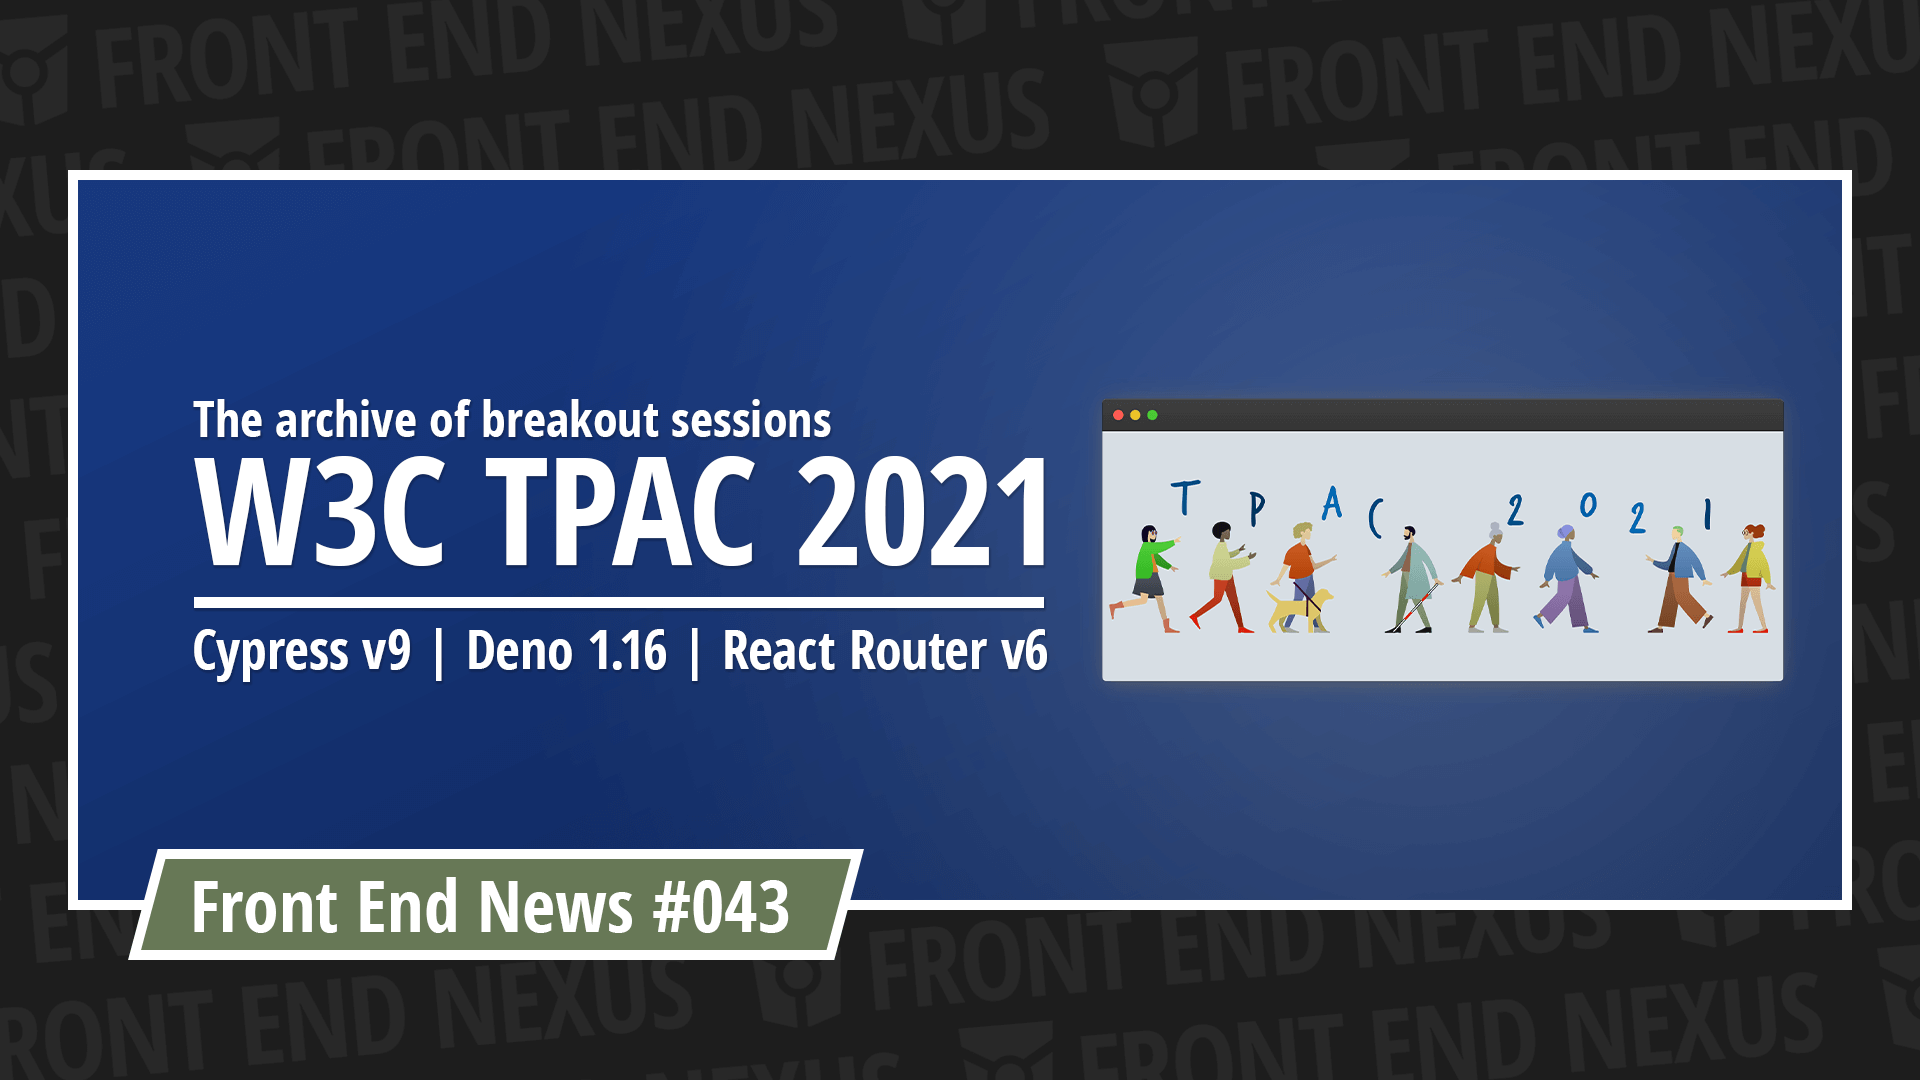 W3C TPAC 2021 archive, Cypress v9, Deno 1.16, React Router v6, and more | Front End News #043